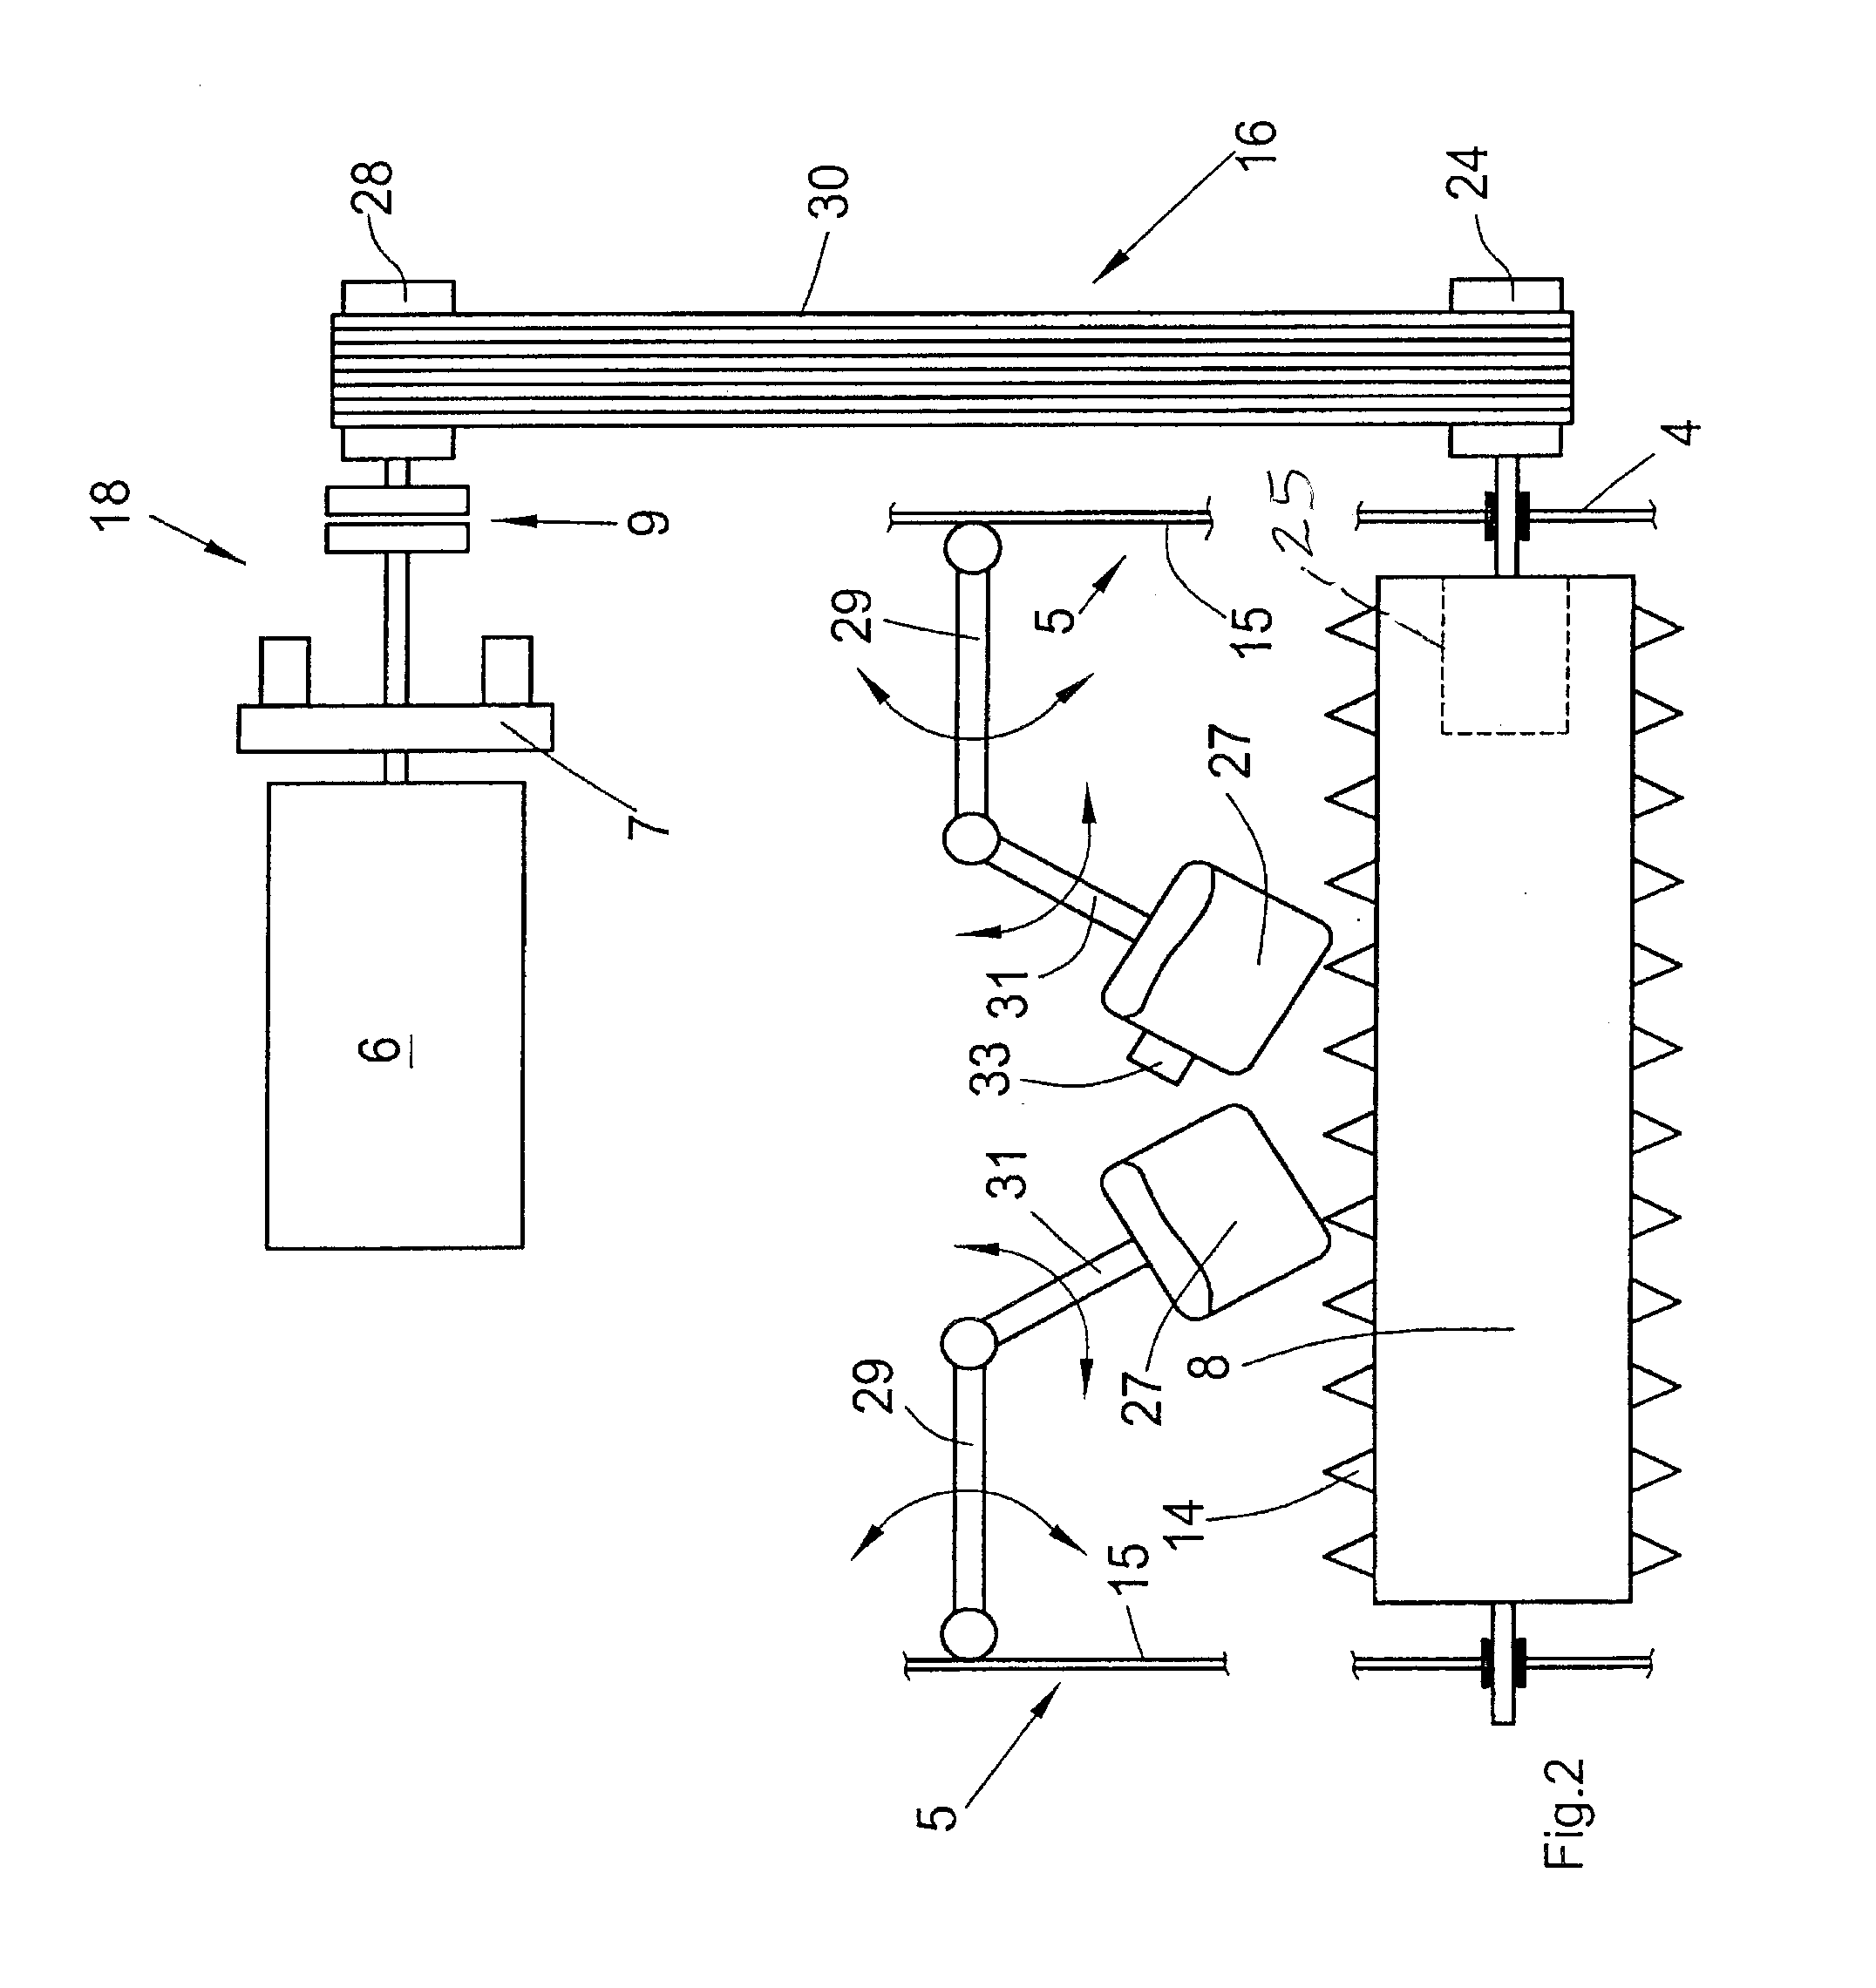 Construction machine for machining floor surfaces